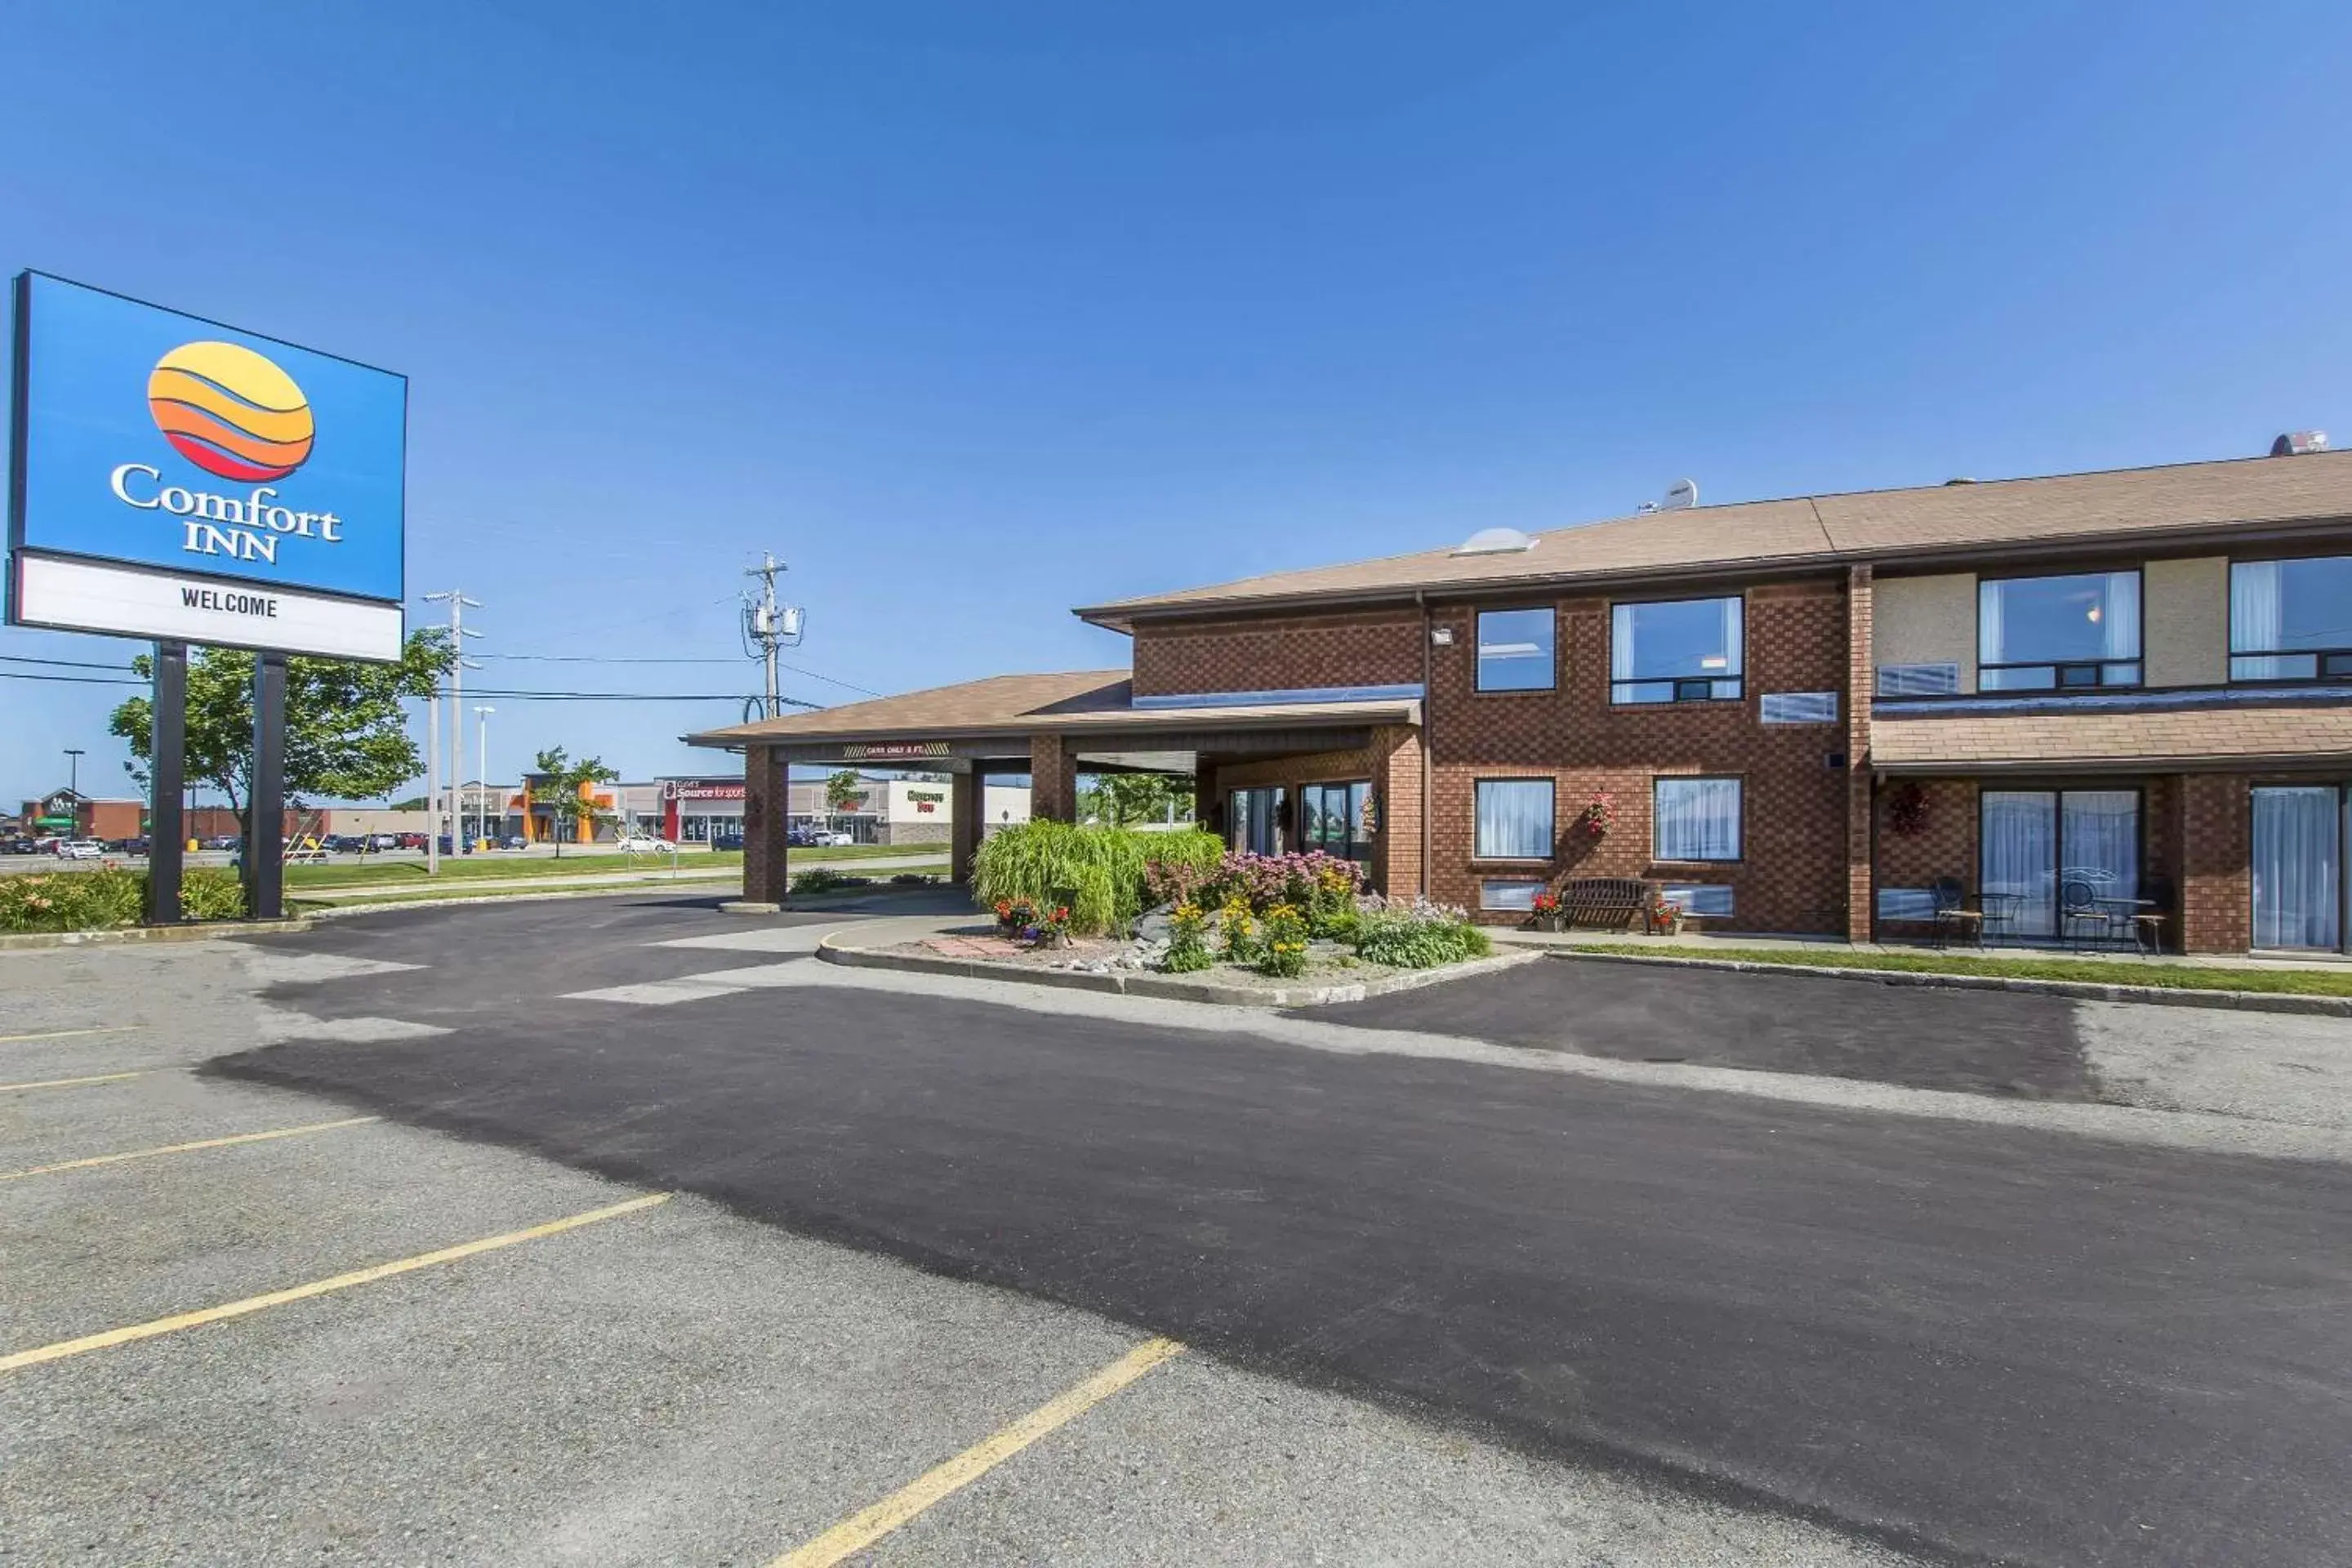 Property building in Comfort Inn Yarmouth